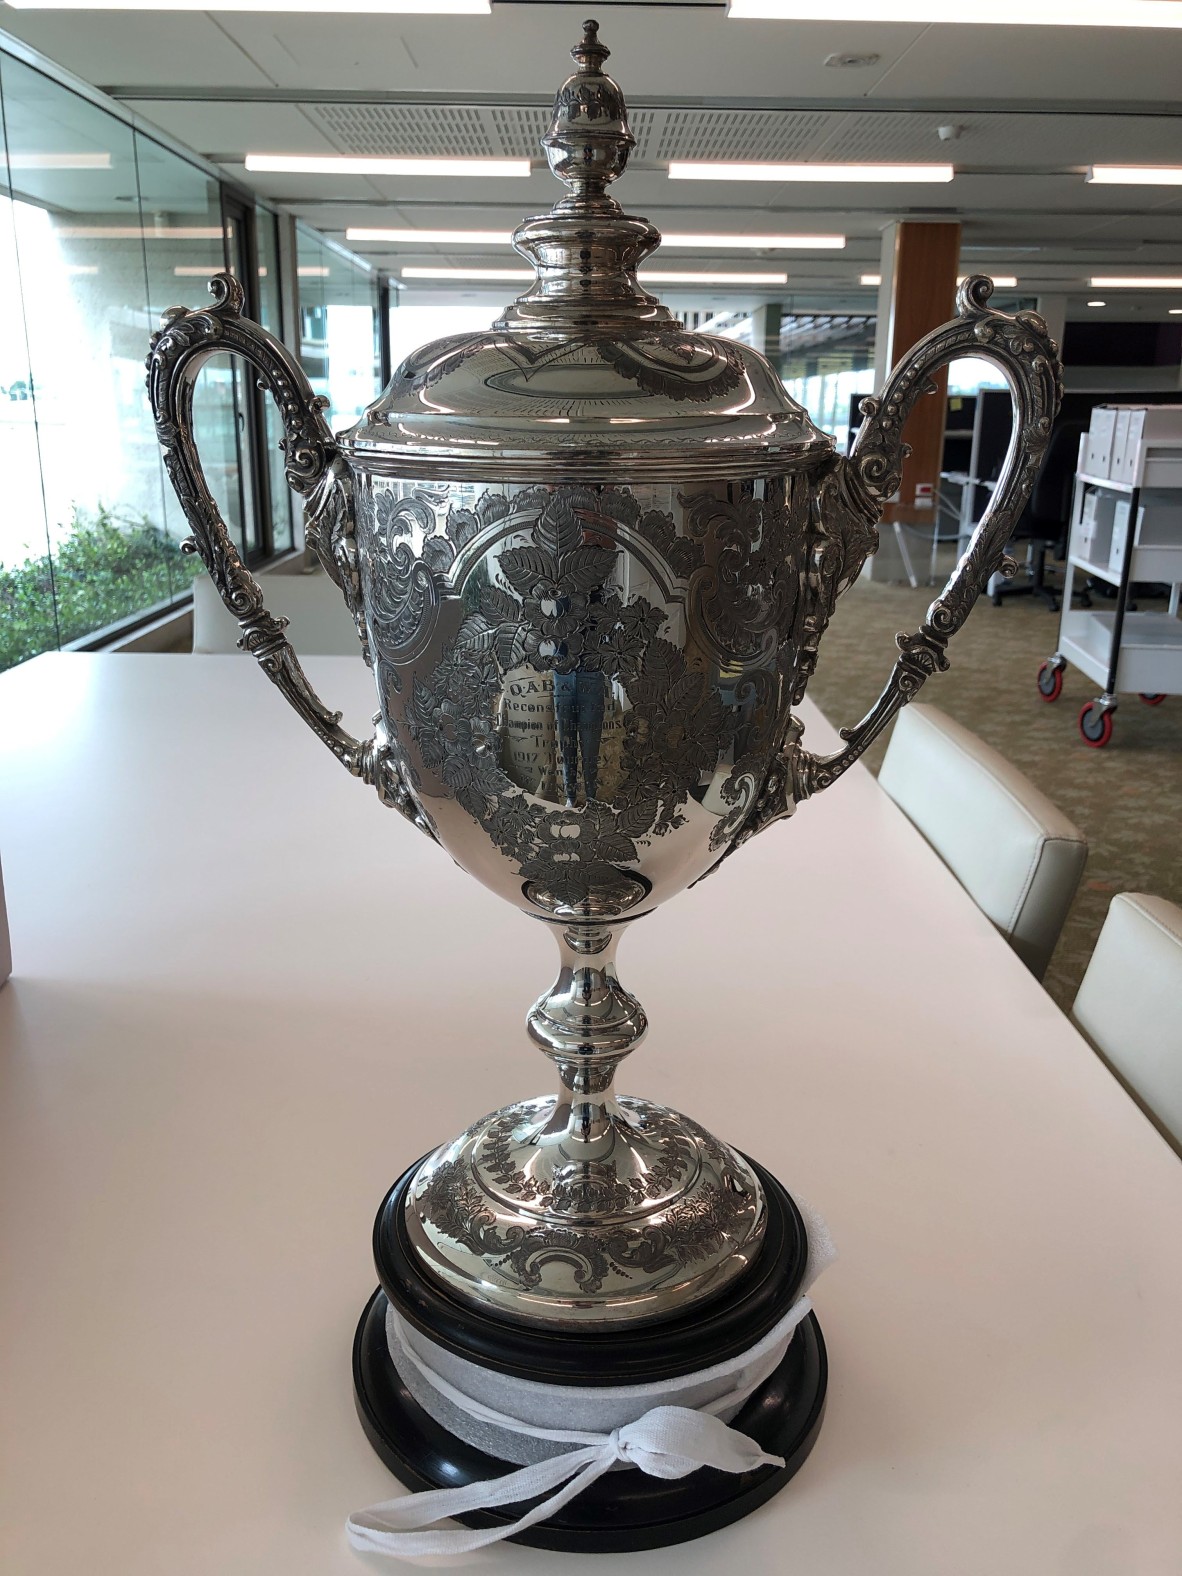 The sterling silver cup trophy presented to William (Billy) Baden Unwin for winning the Queensland Amateur Boxing title in 1917.